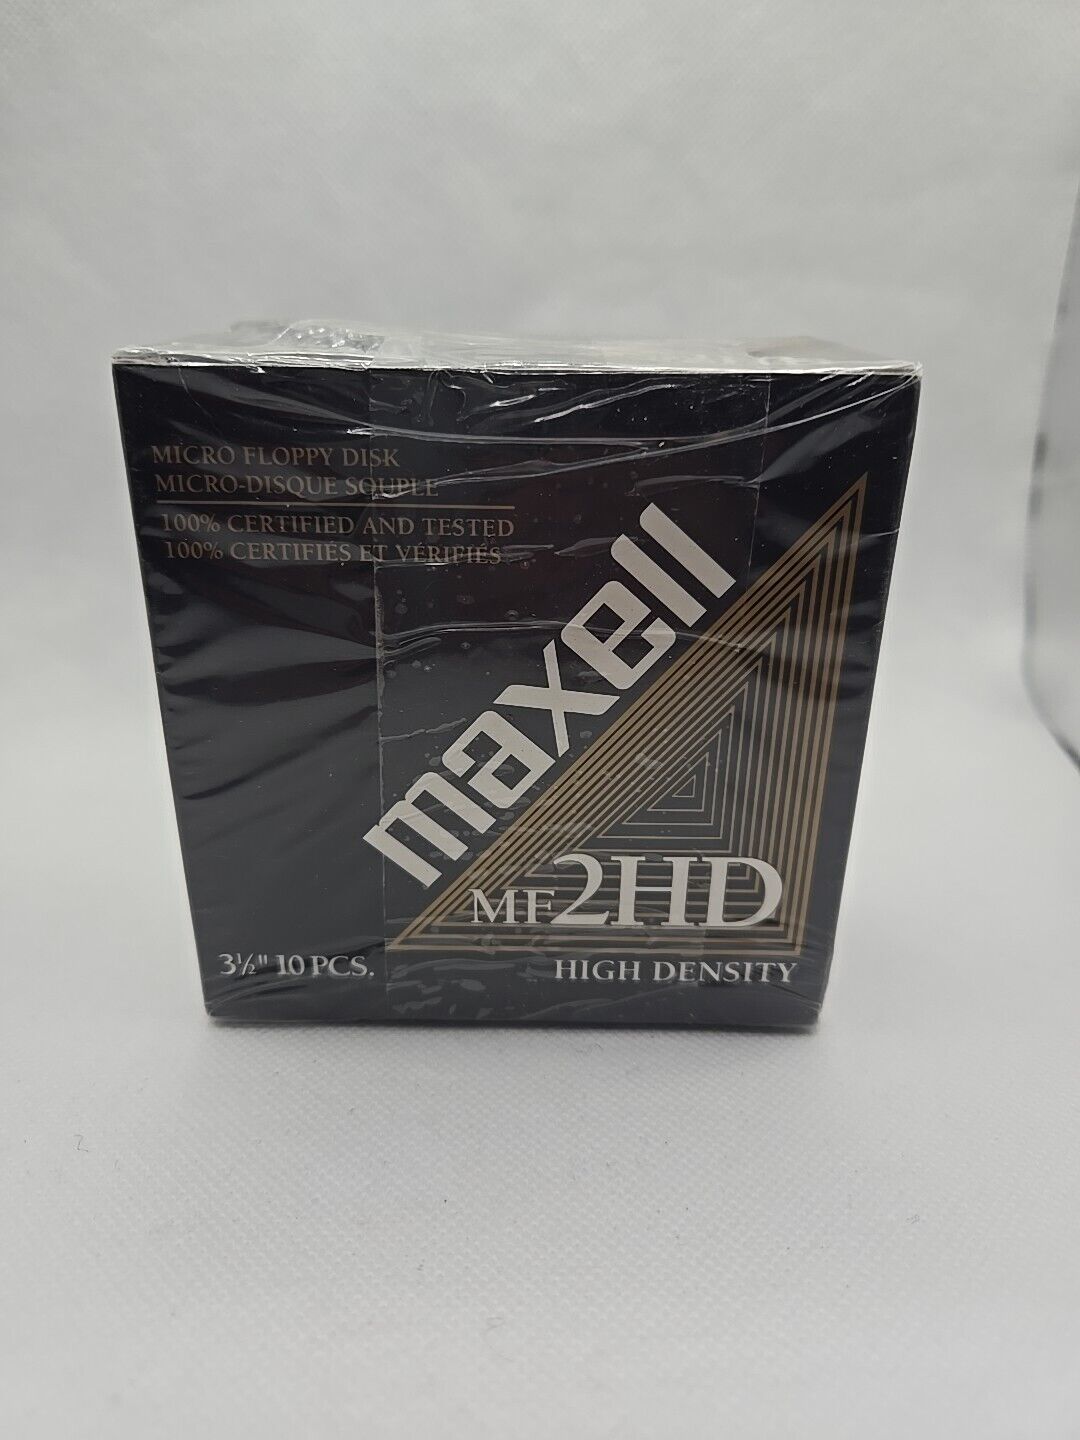 Maxell MF2HD Floppy Disks 1.44MB IBM & Compatibles Formatted 10pk NEW SEALED